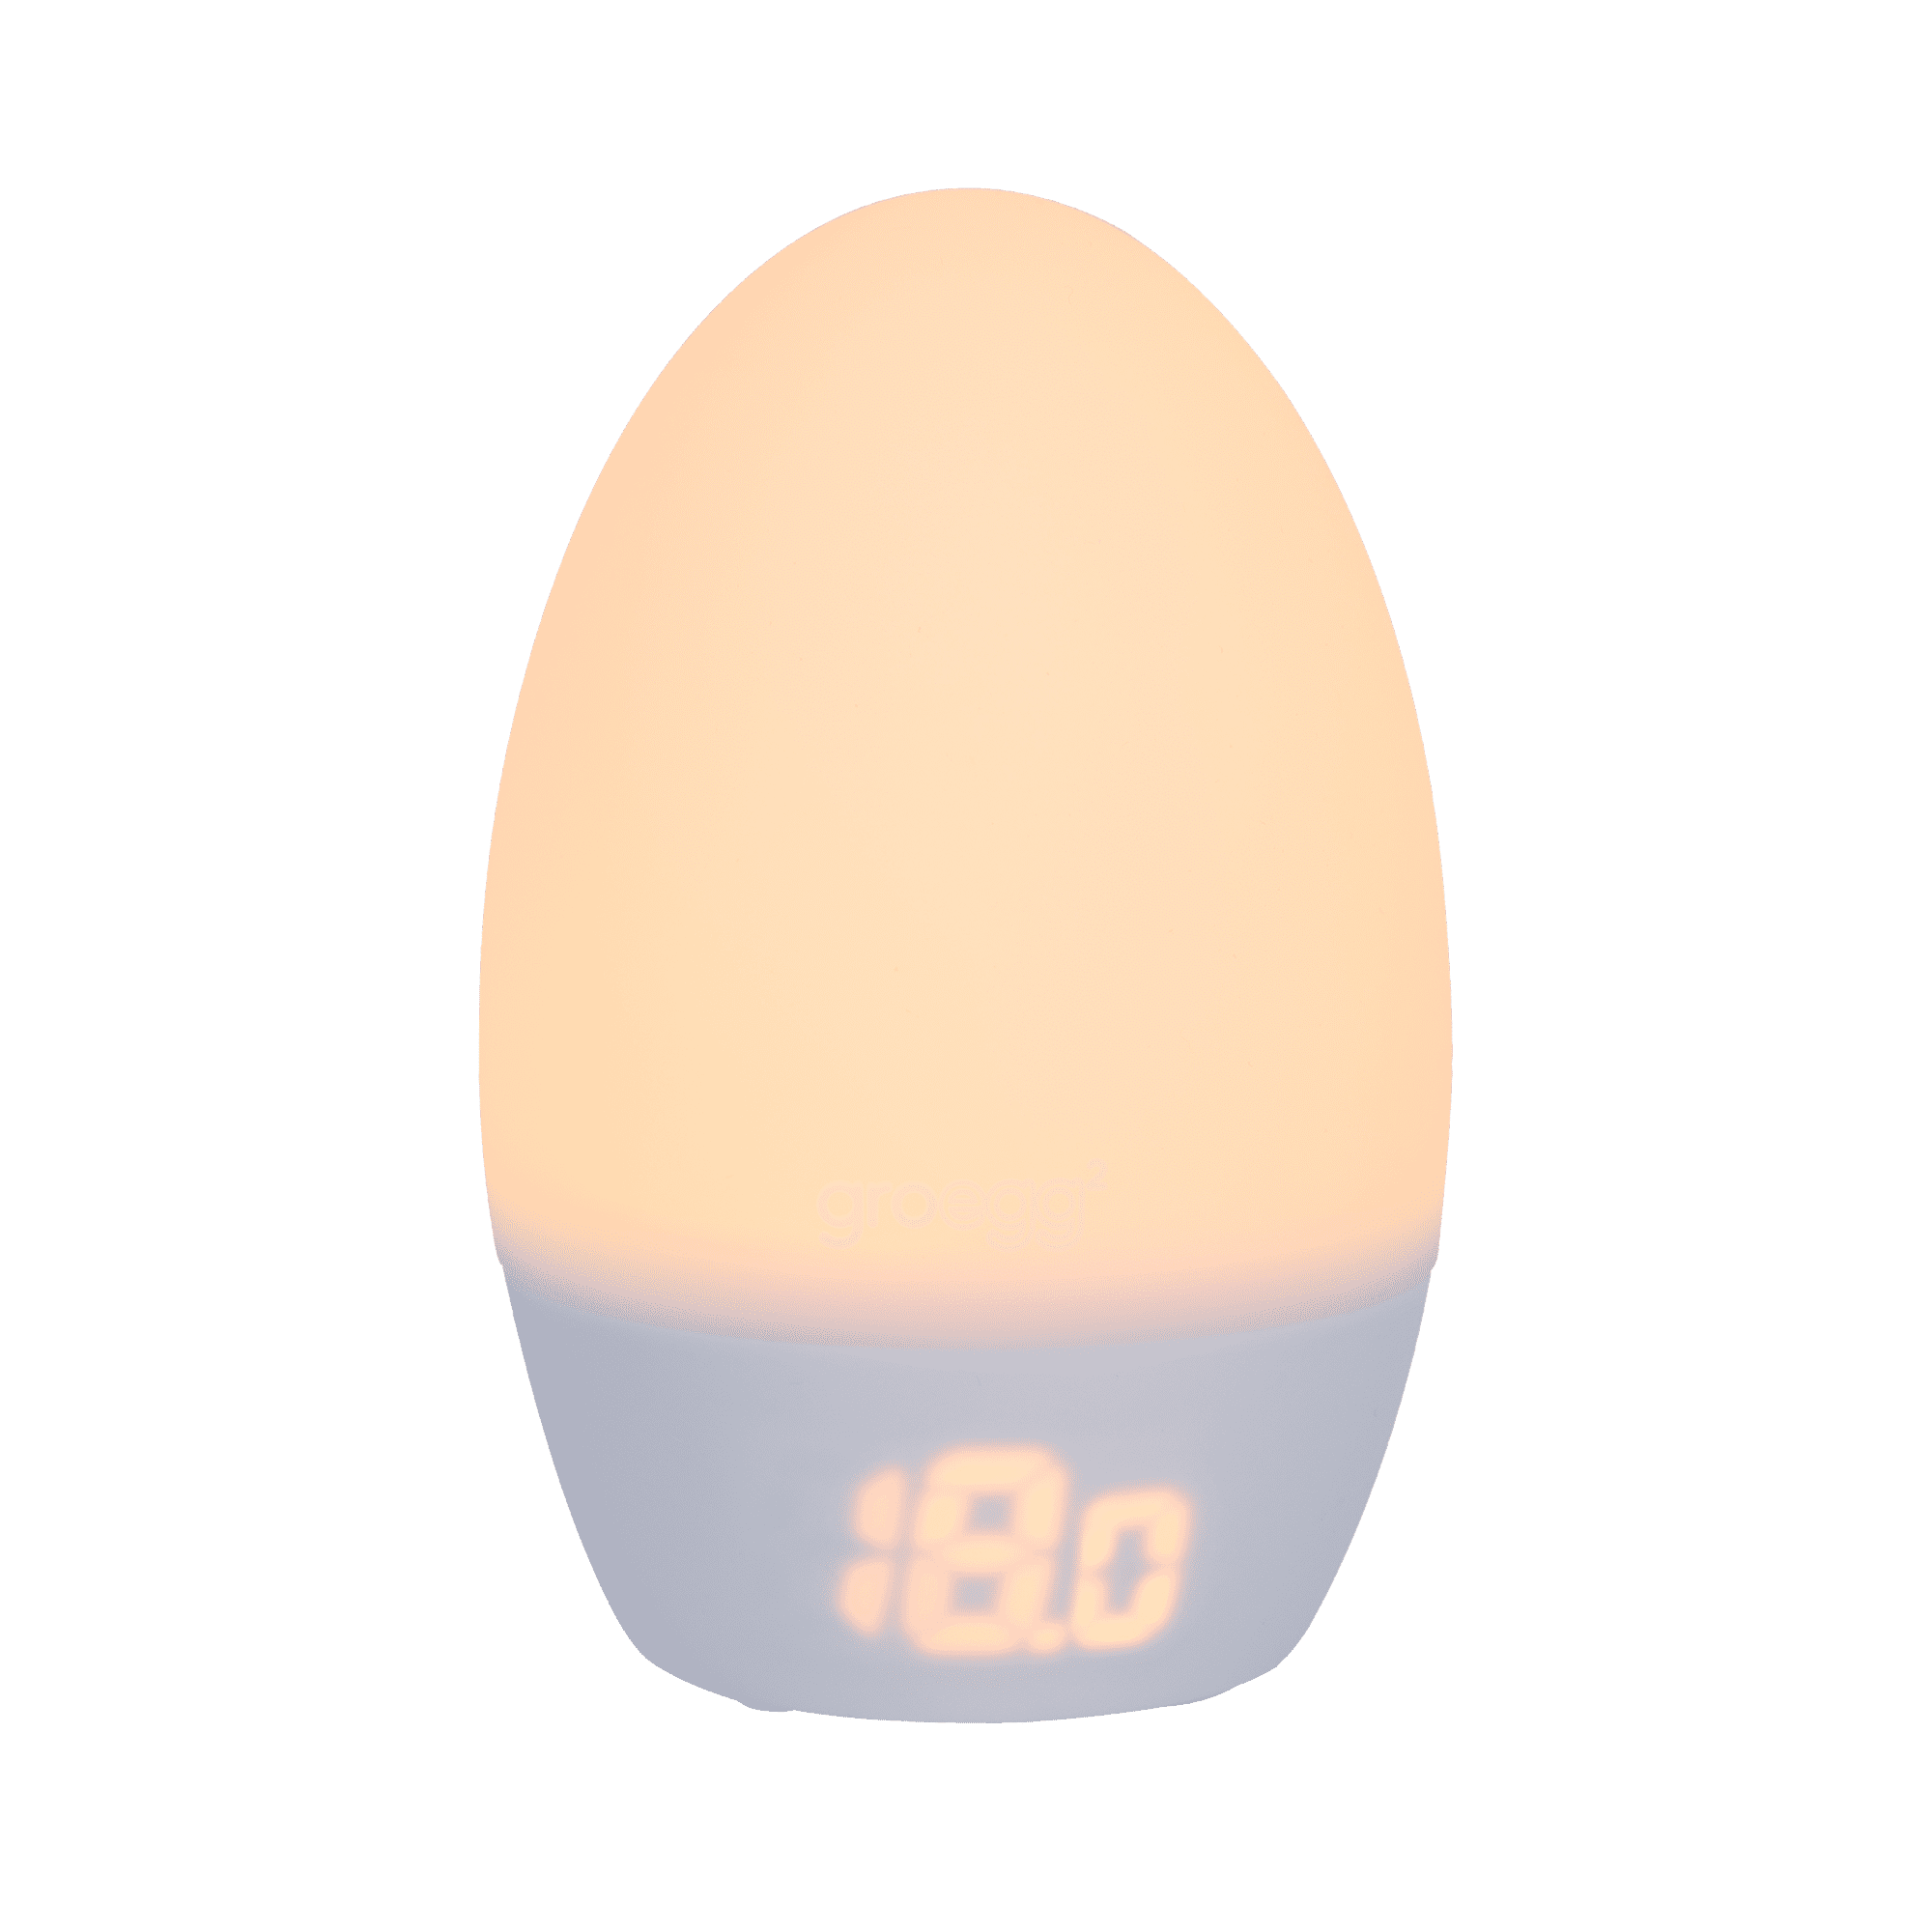 Tommee Tippee GroEgg2 Digital Room Thermometer